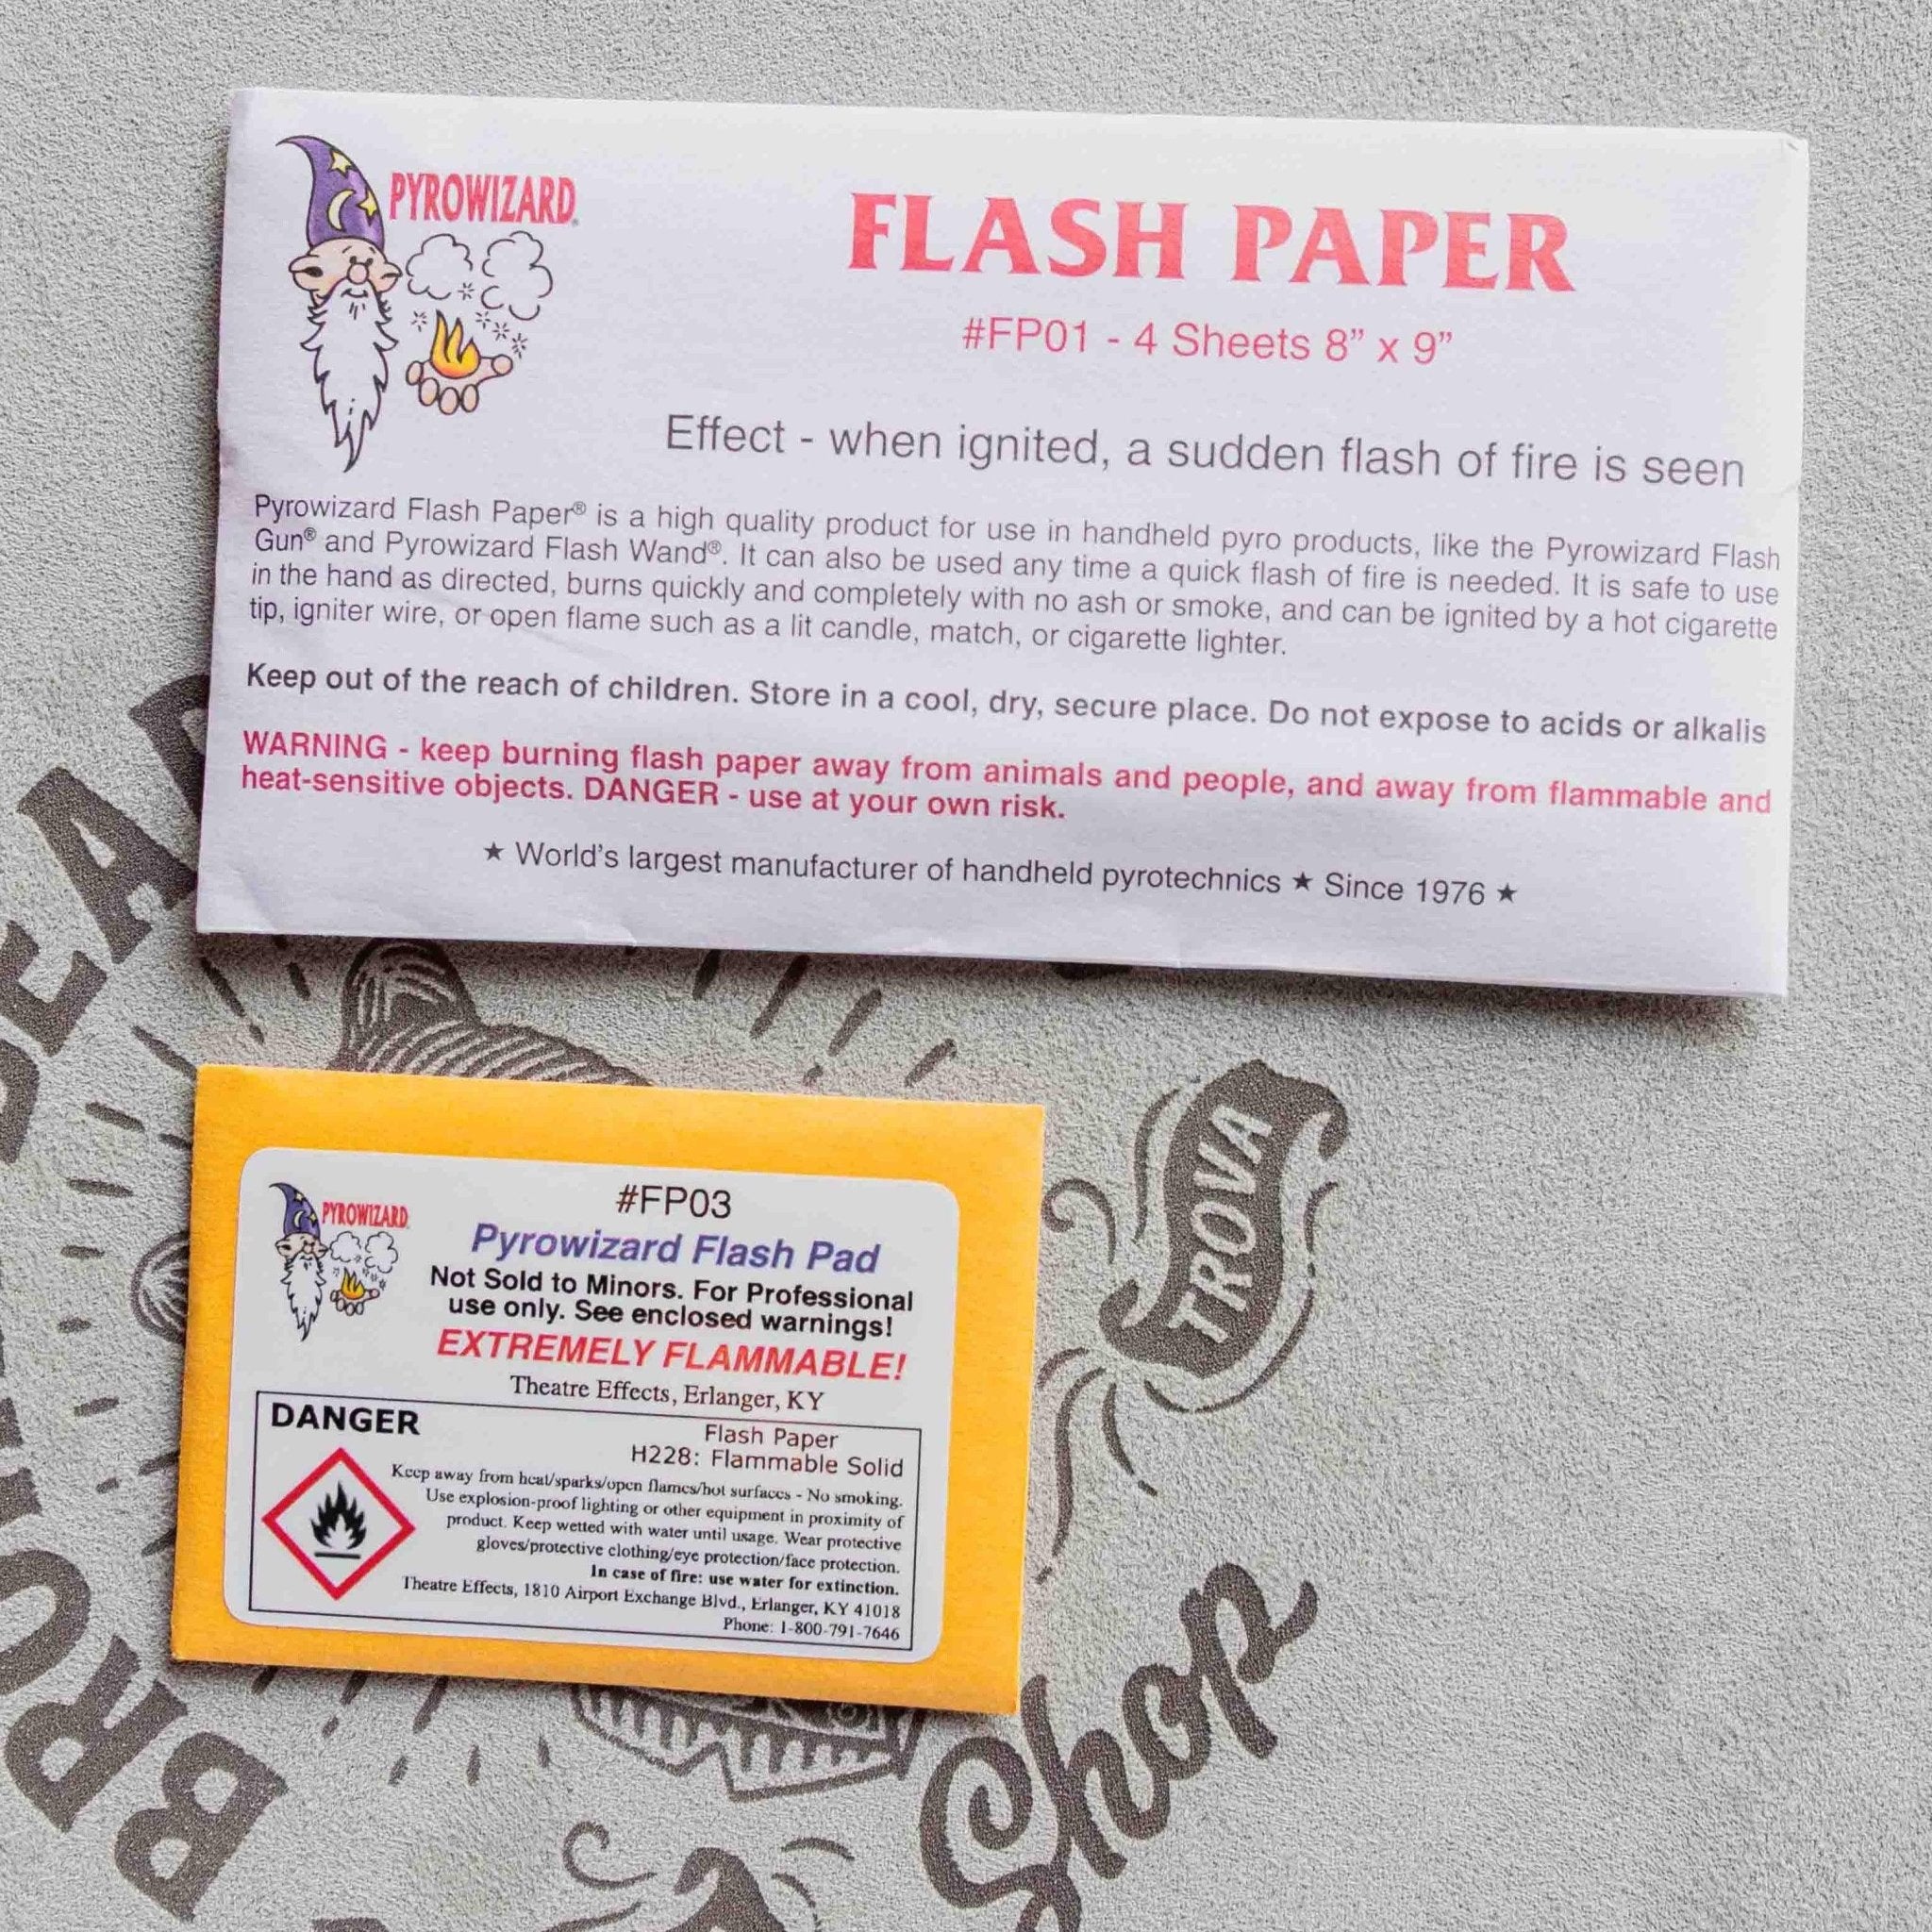 Flash Paper and Flash Pads